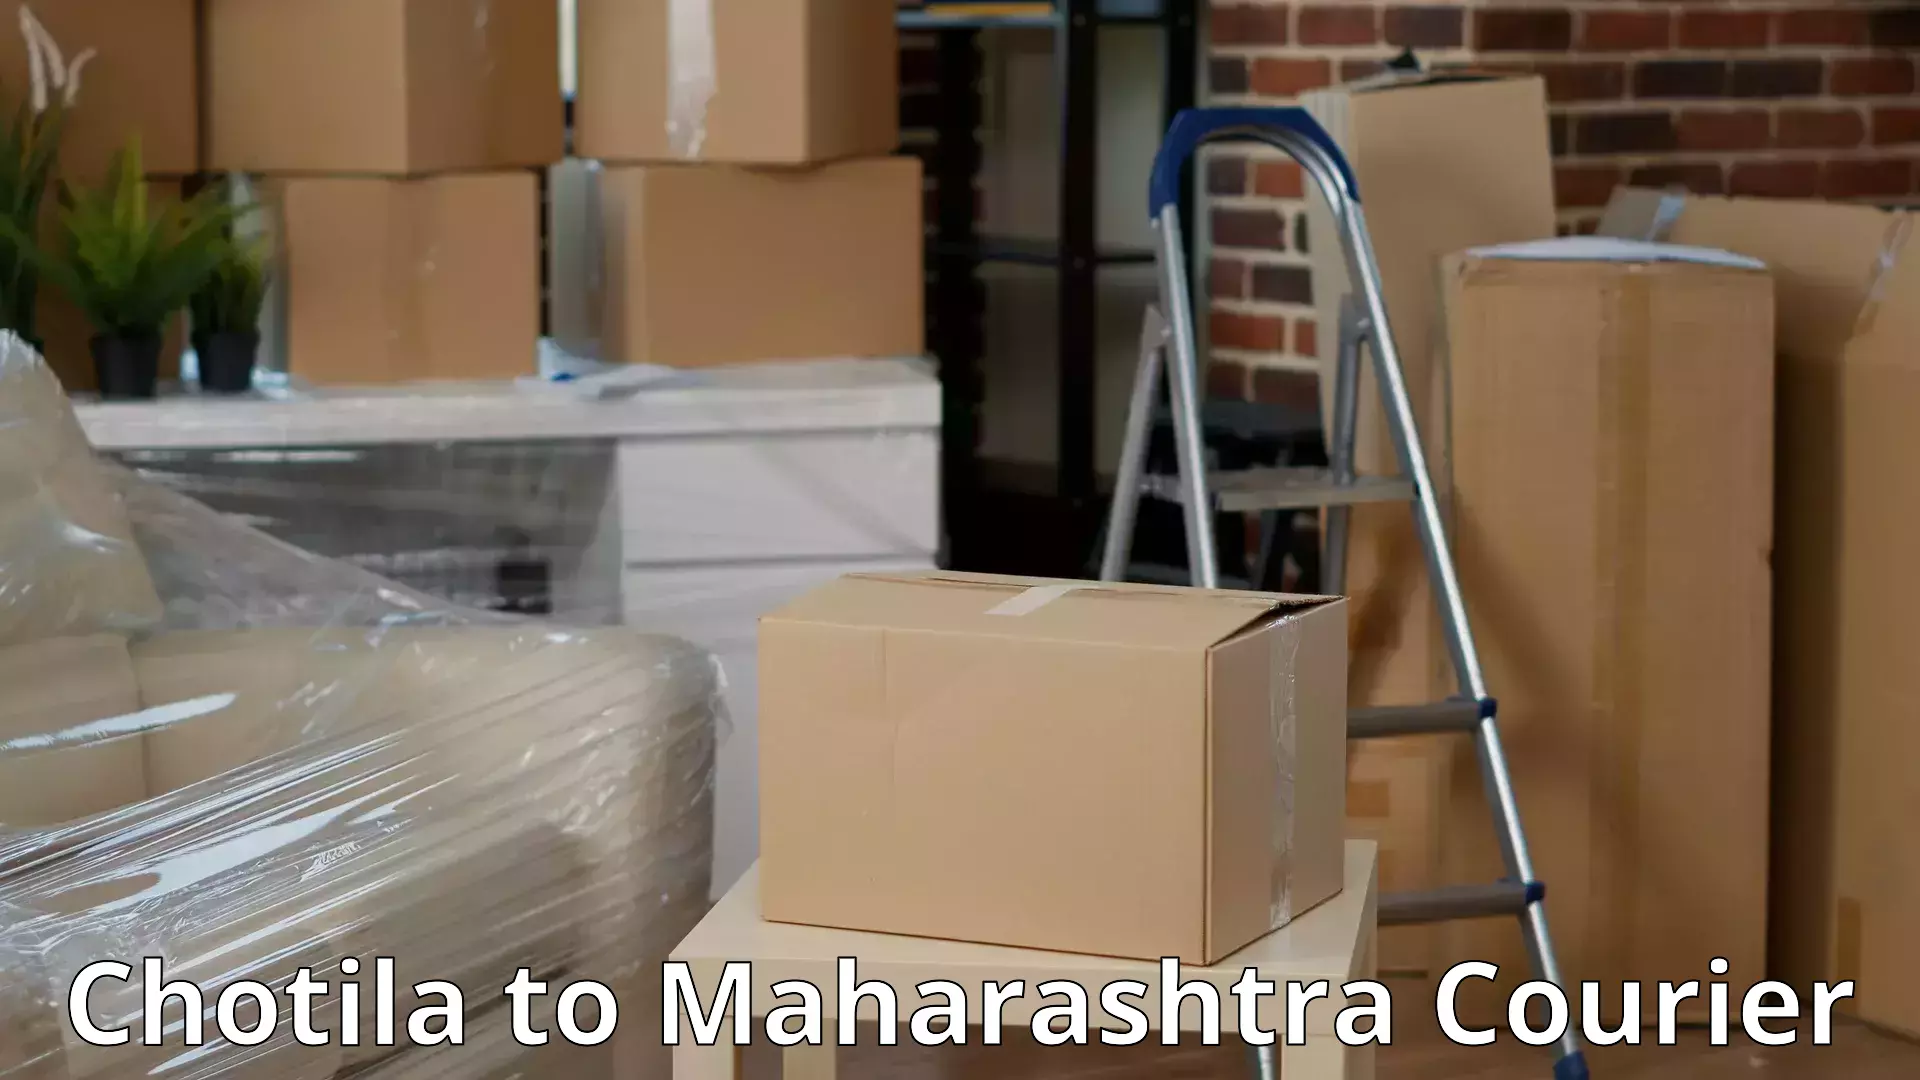 Trusted moving company Chotila to Dharmabad